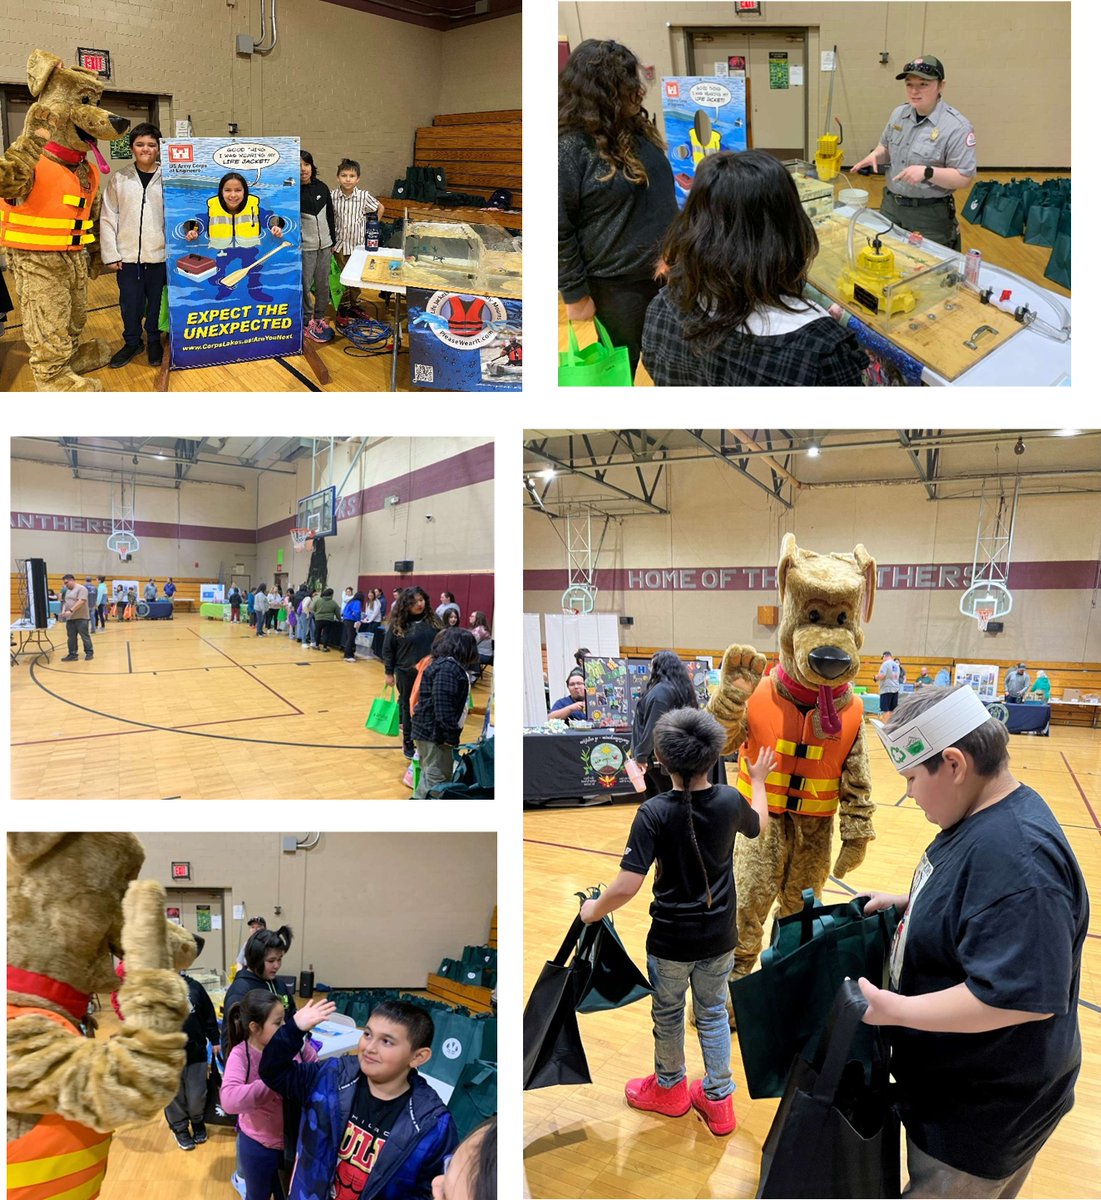 Our Northern Headwaters’ staff participated in an #EarthDay event hosted by the Leech Lake Band of Ojibwe. Park Rangers staffed tables throughout the event, providing activities including explaining how a dam works as well as their potential dangers. #BuildingStrong #USACEMVD